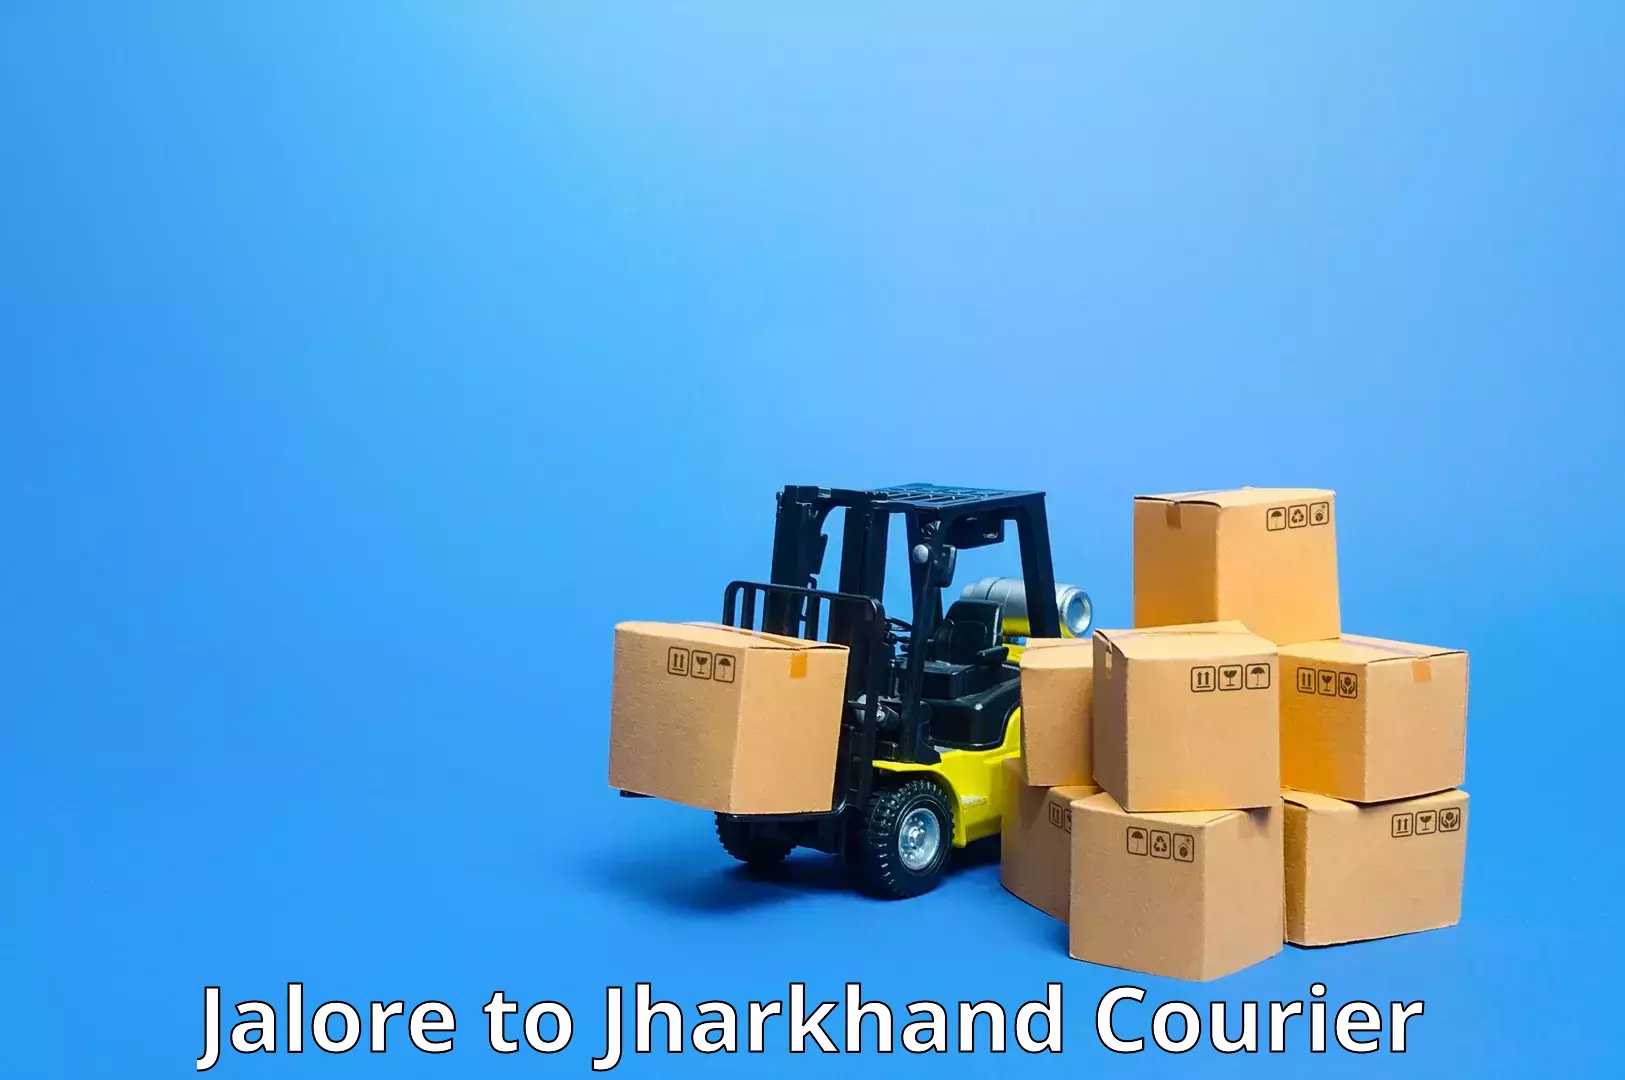 Sustainable delivery practices Jalore to Jharkhand